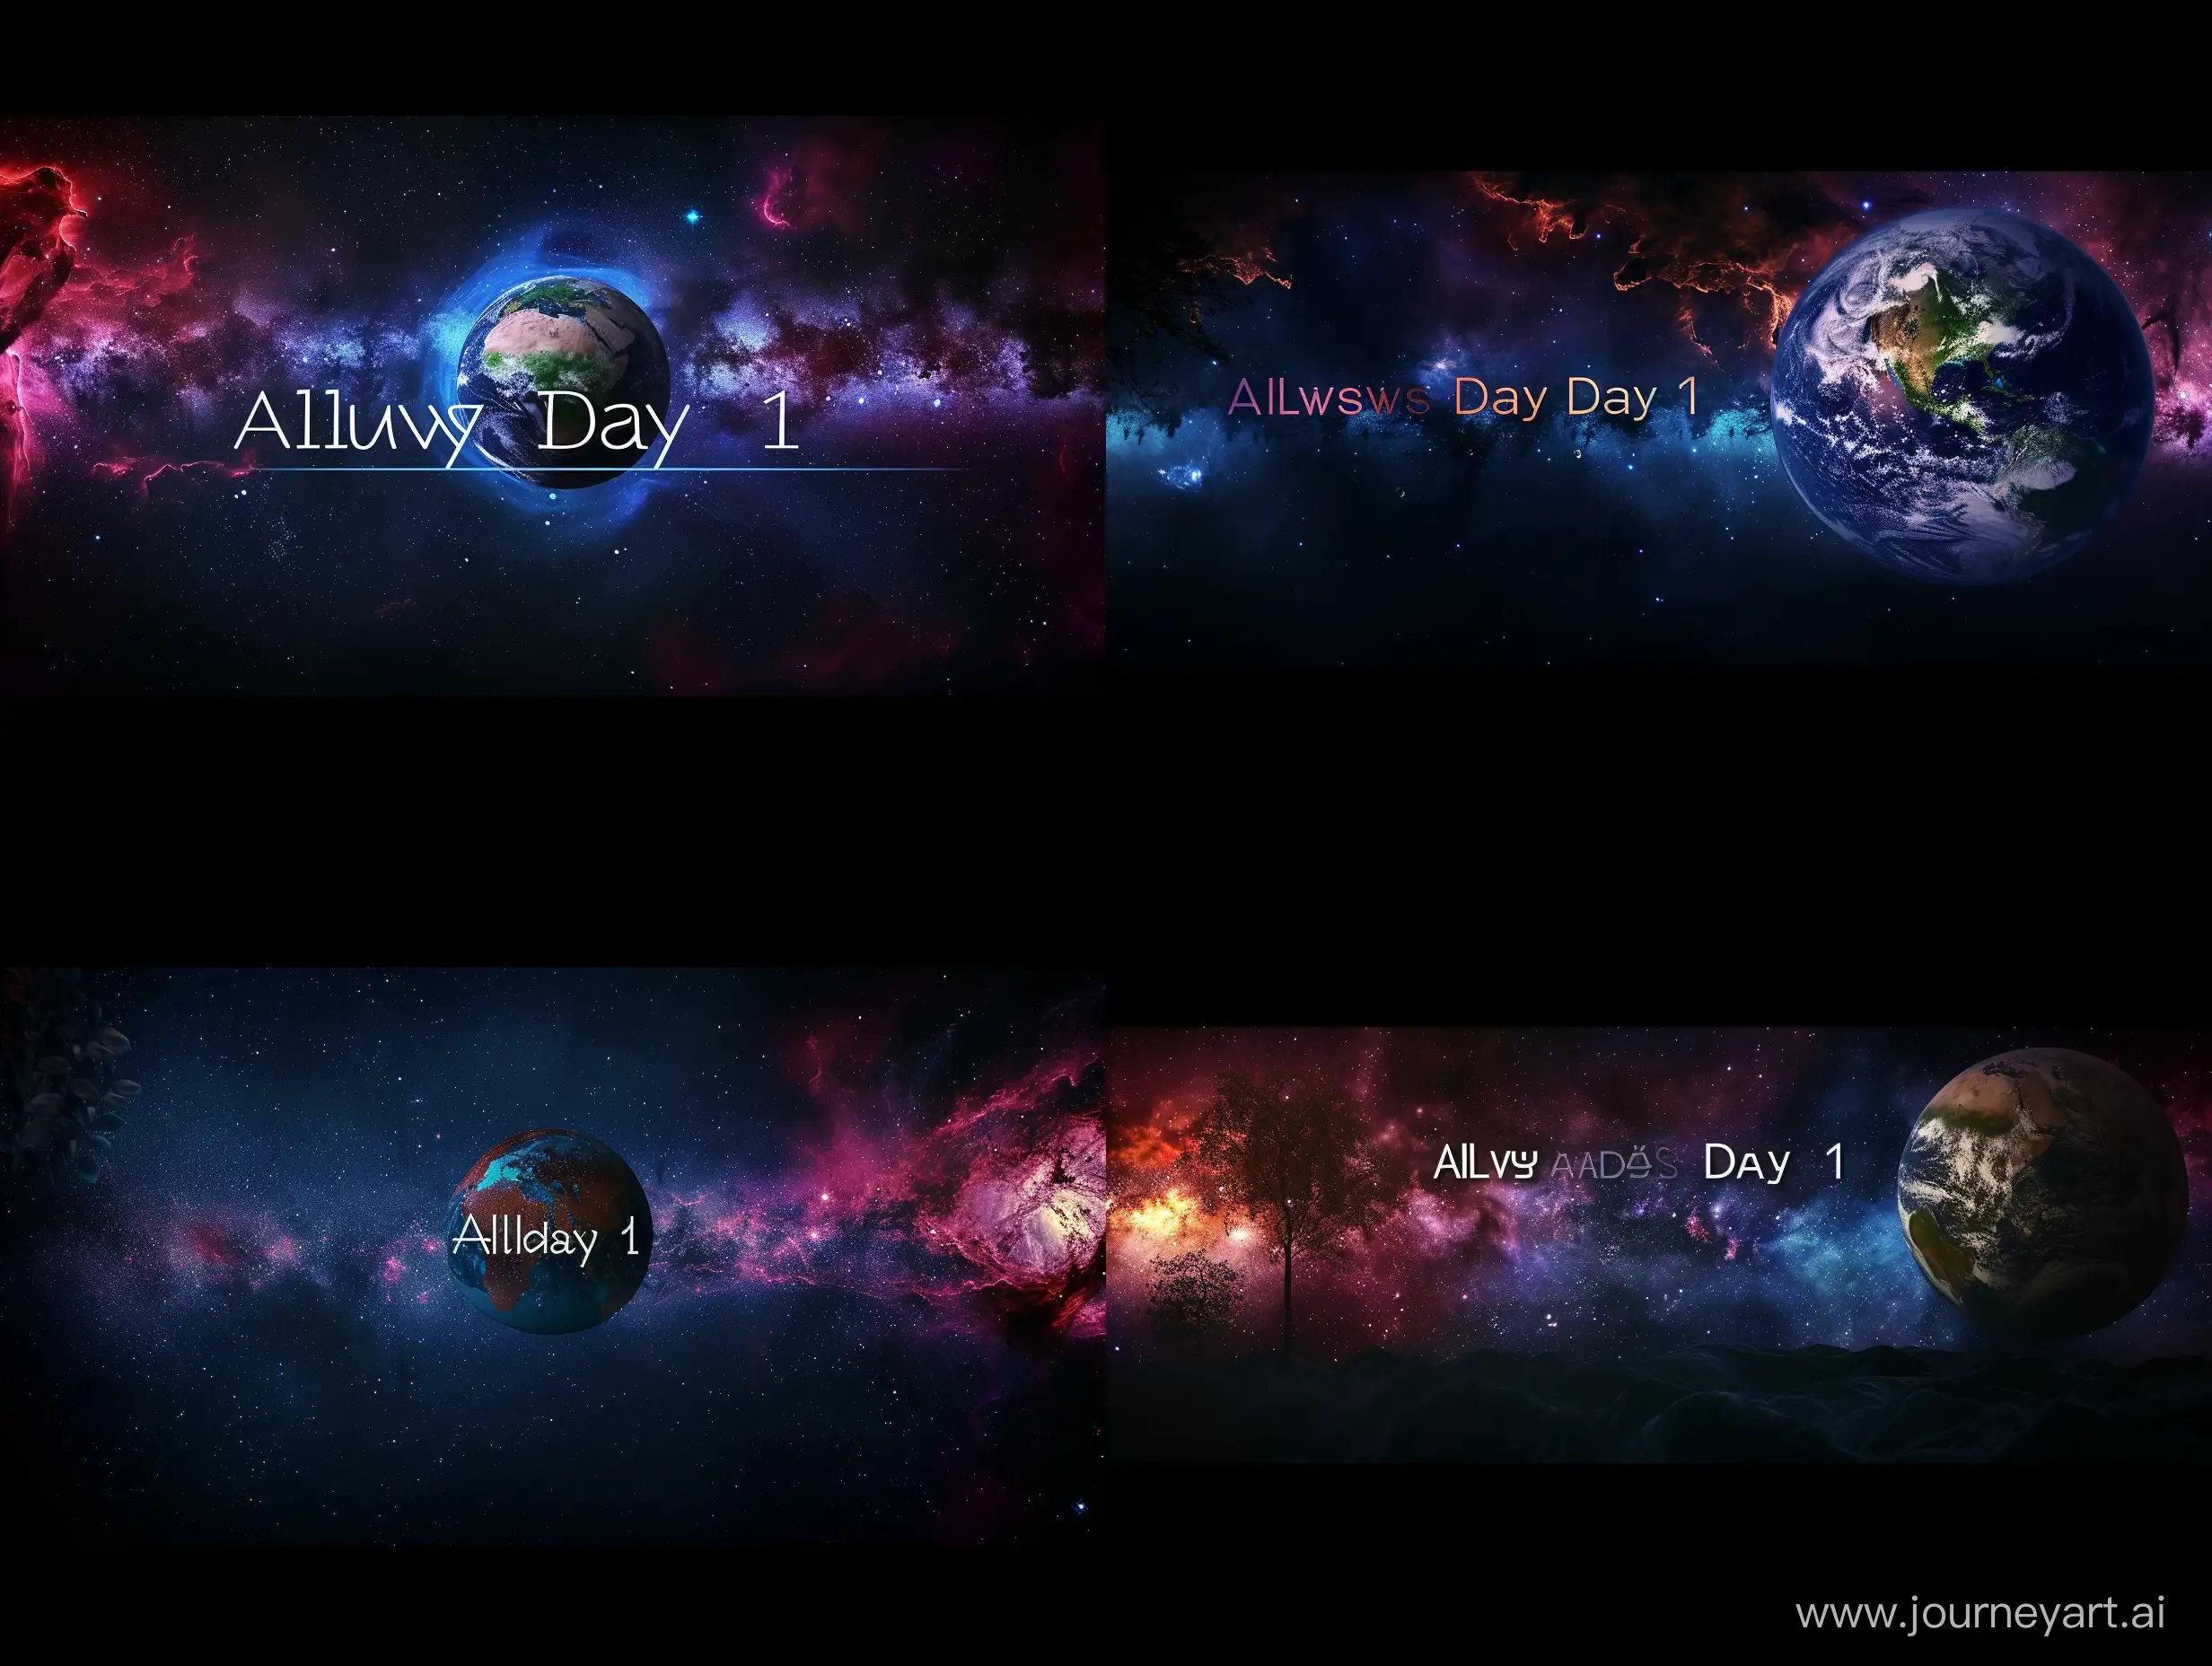 create a panorama wide screen  image with dark blue, dark purple and black tones. the background is a galaxy. place a earth object that has a diameter about 30% of the image height. The object should be positioned in the image center. On that object place a text "Always Day 1". The text should be split in two lines. The text should span most of the image